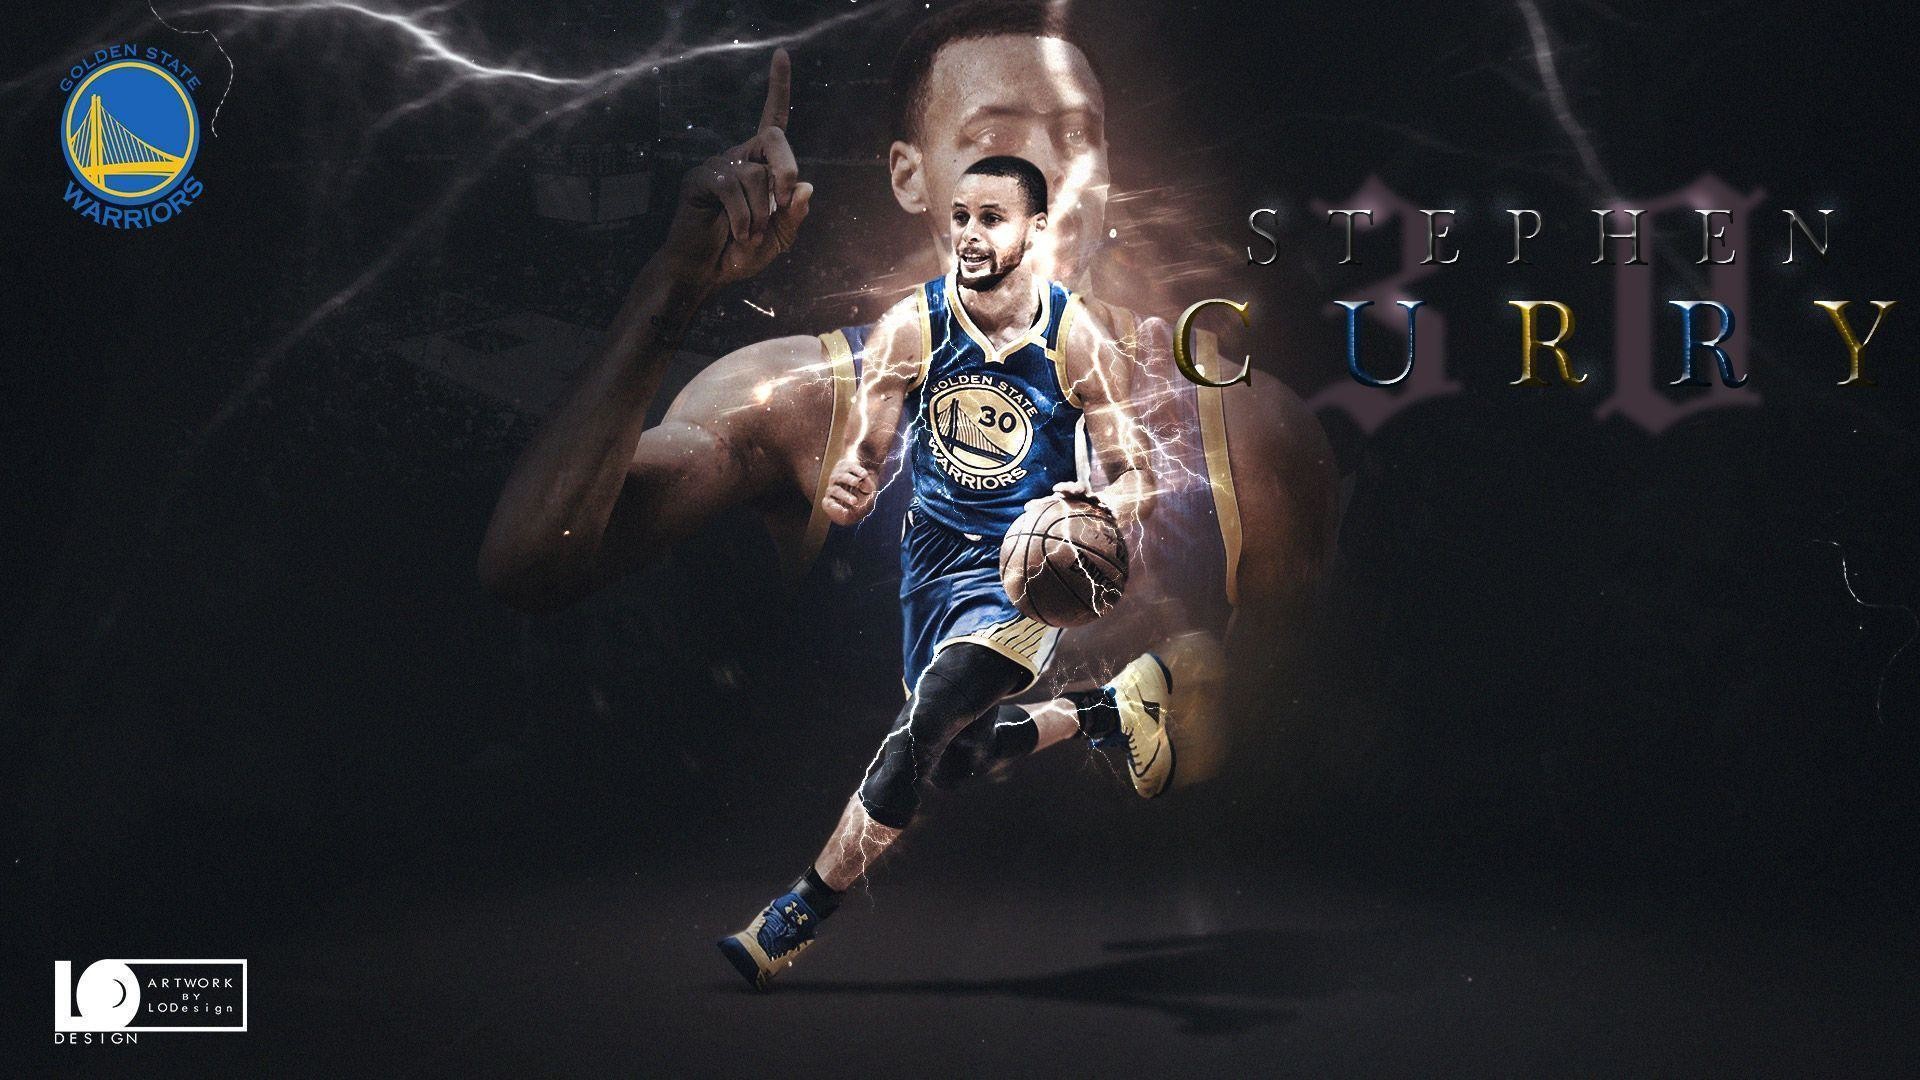 1920x1080 Stephen Curry Wallpapers | Basketball Wallpapers at .